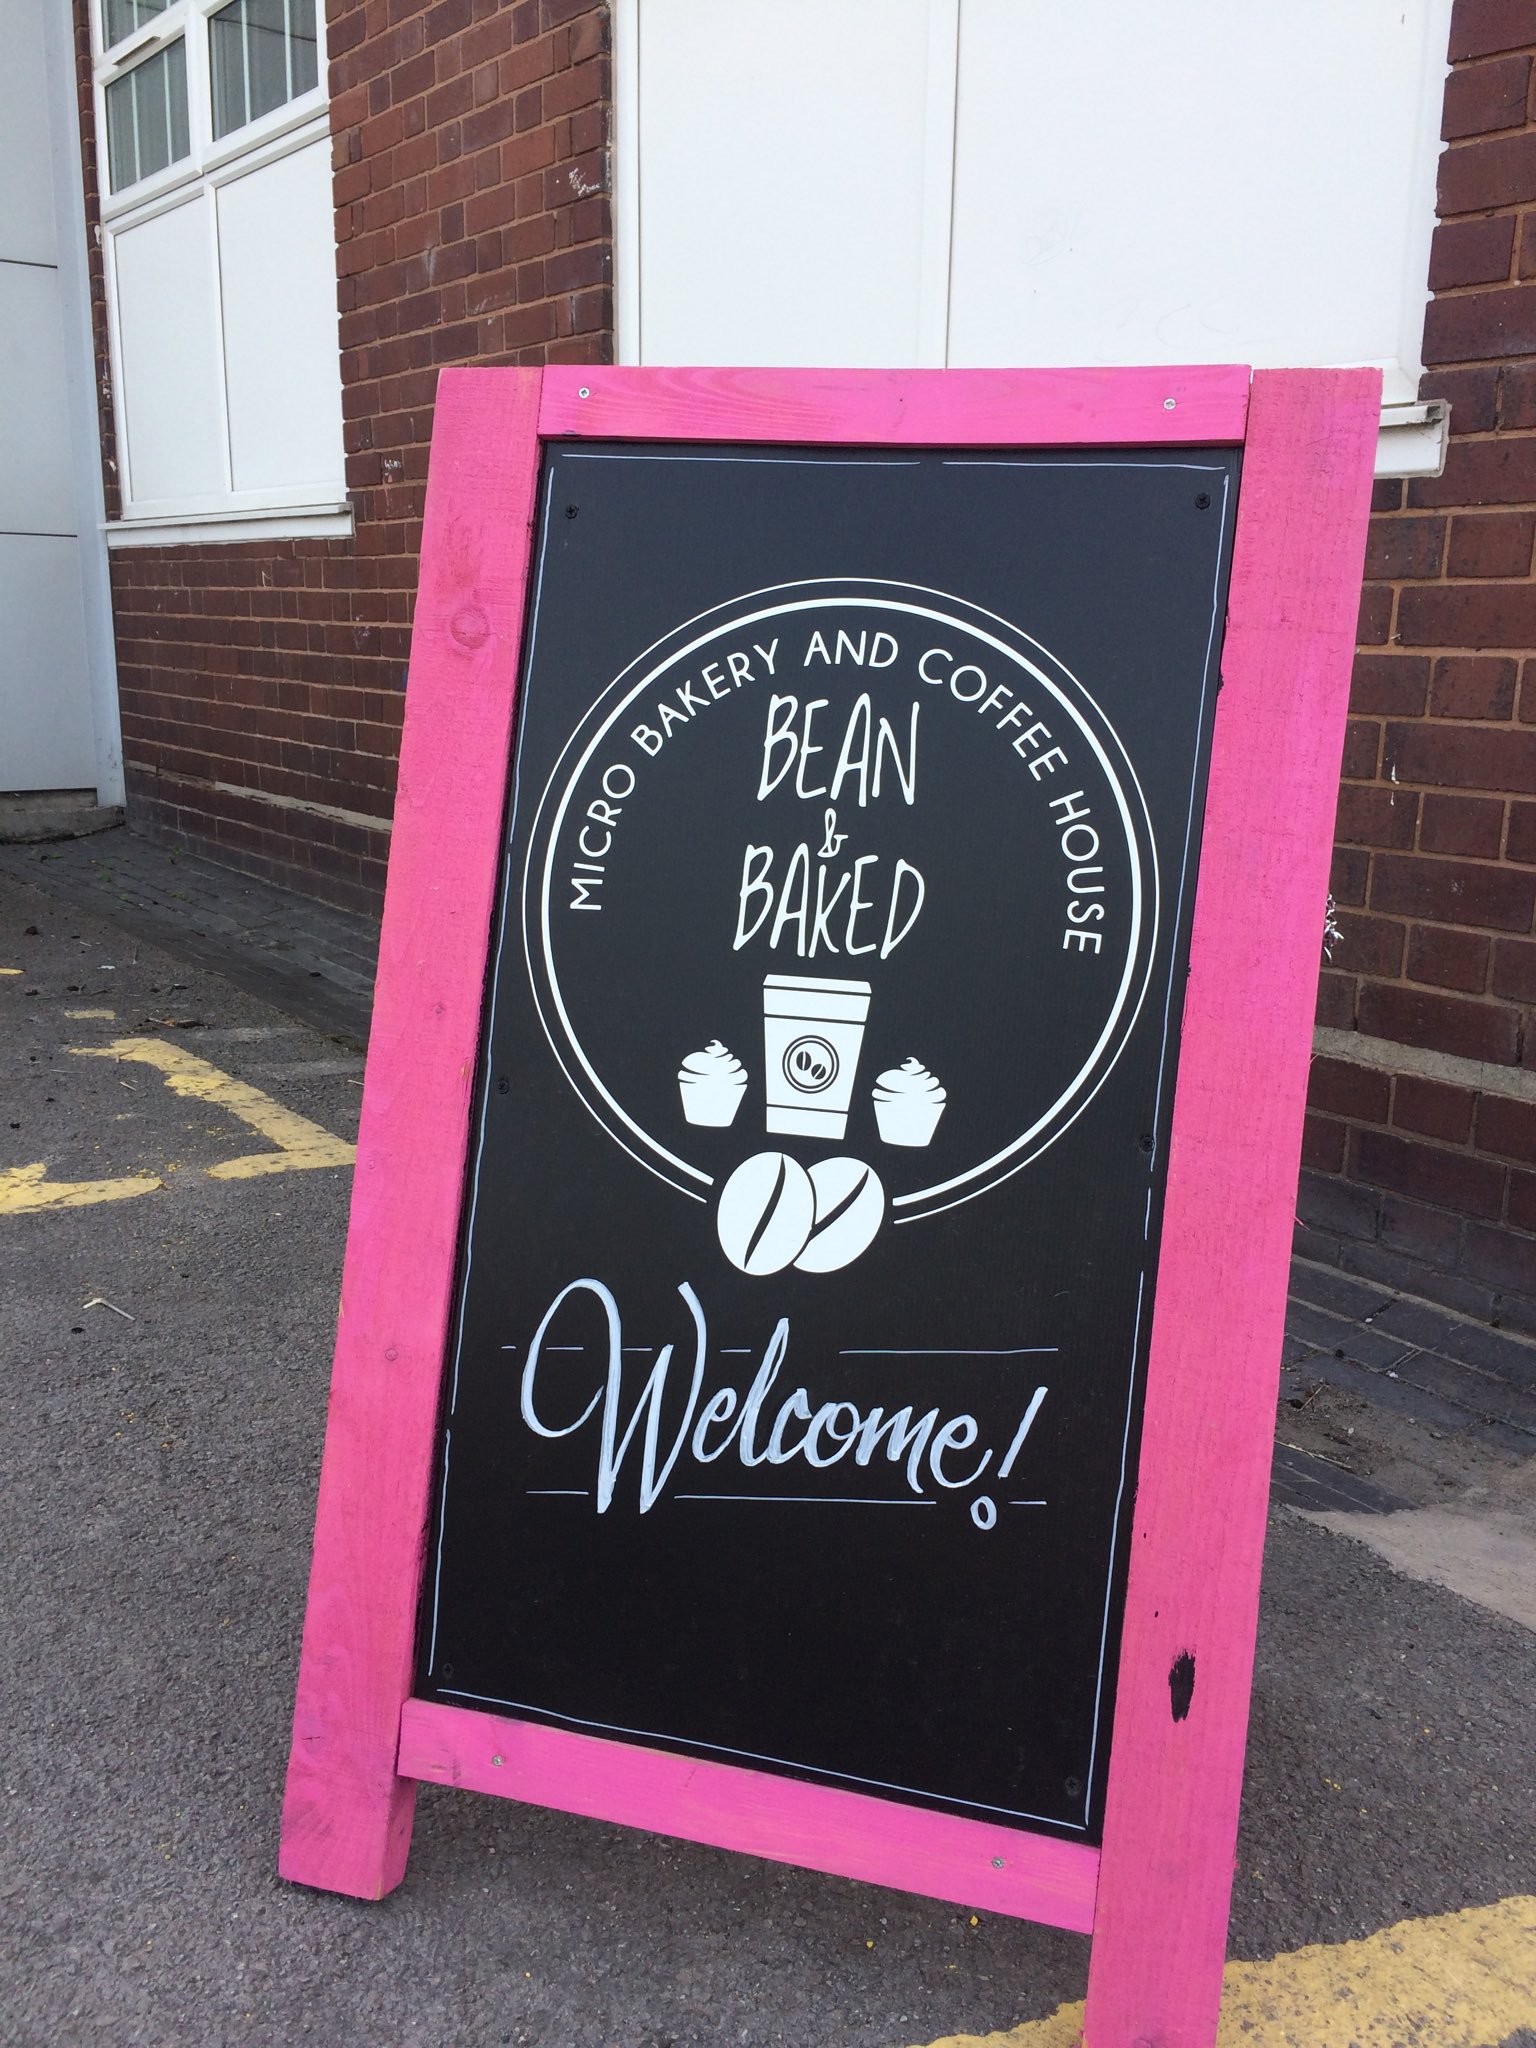 Bean and Baked now open at Brownhills CA!